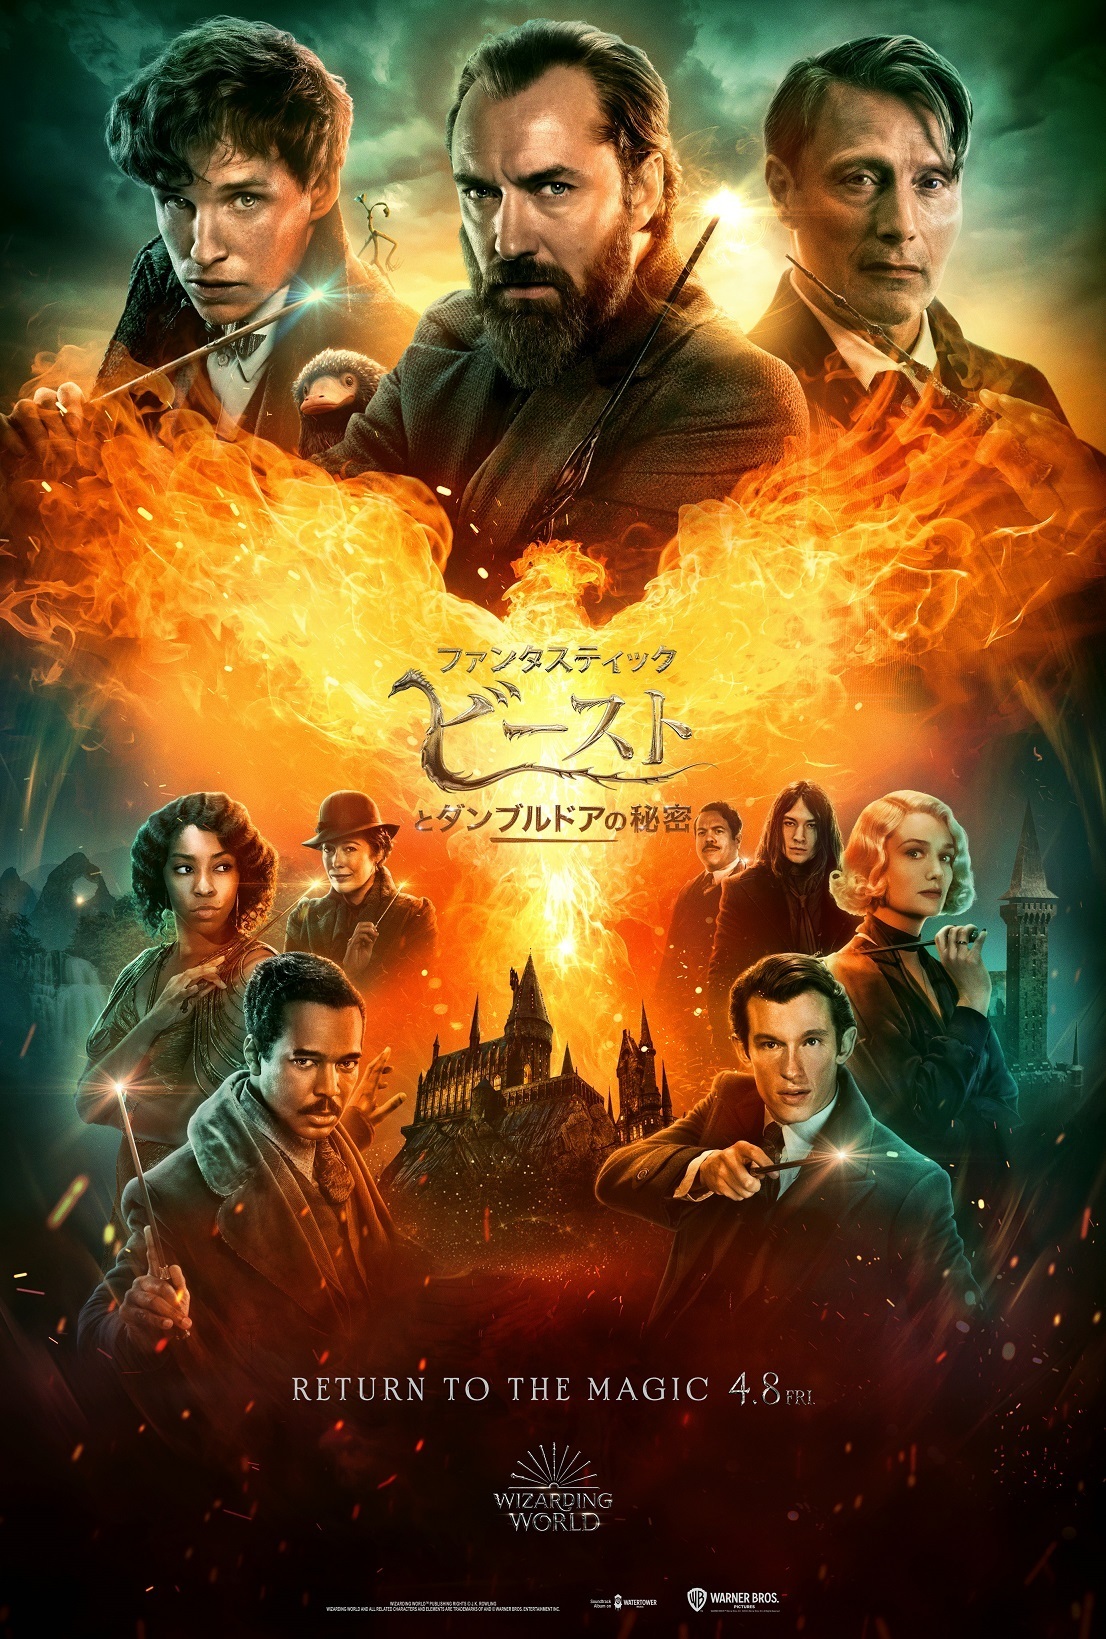 （C）2021 Warner Bros. Ent. All Rights Reserved Wizarding World TM Publishing Rights 